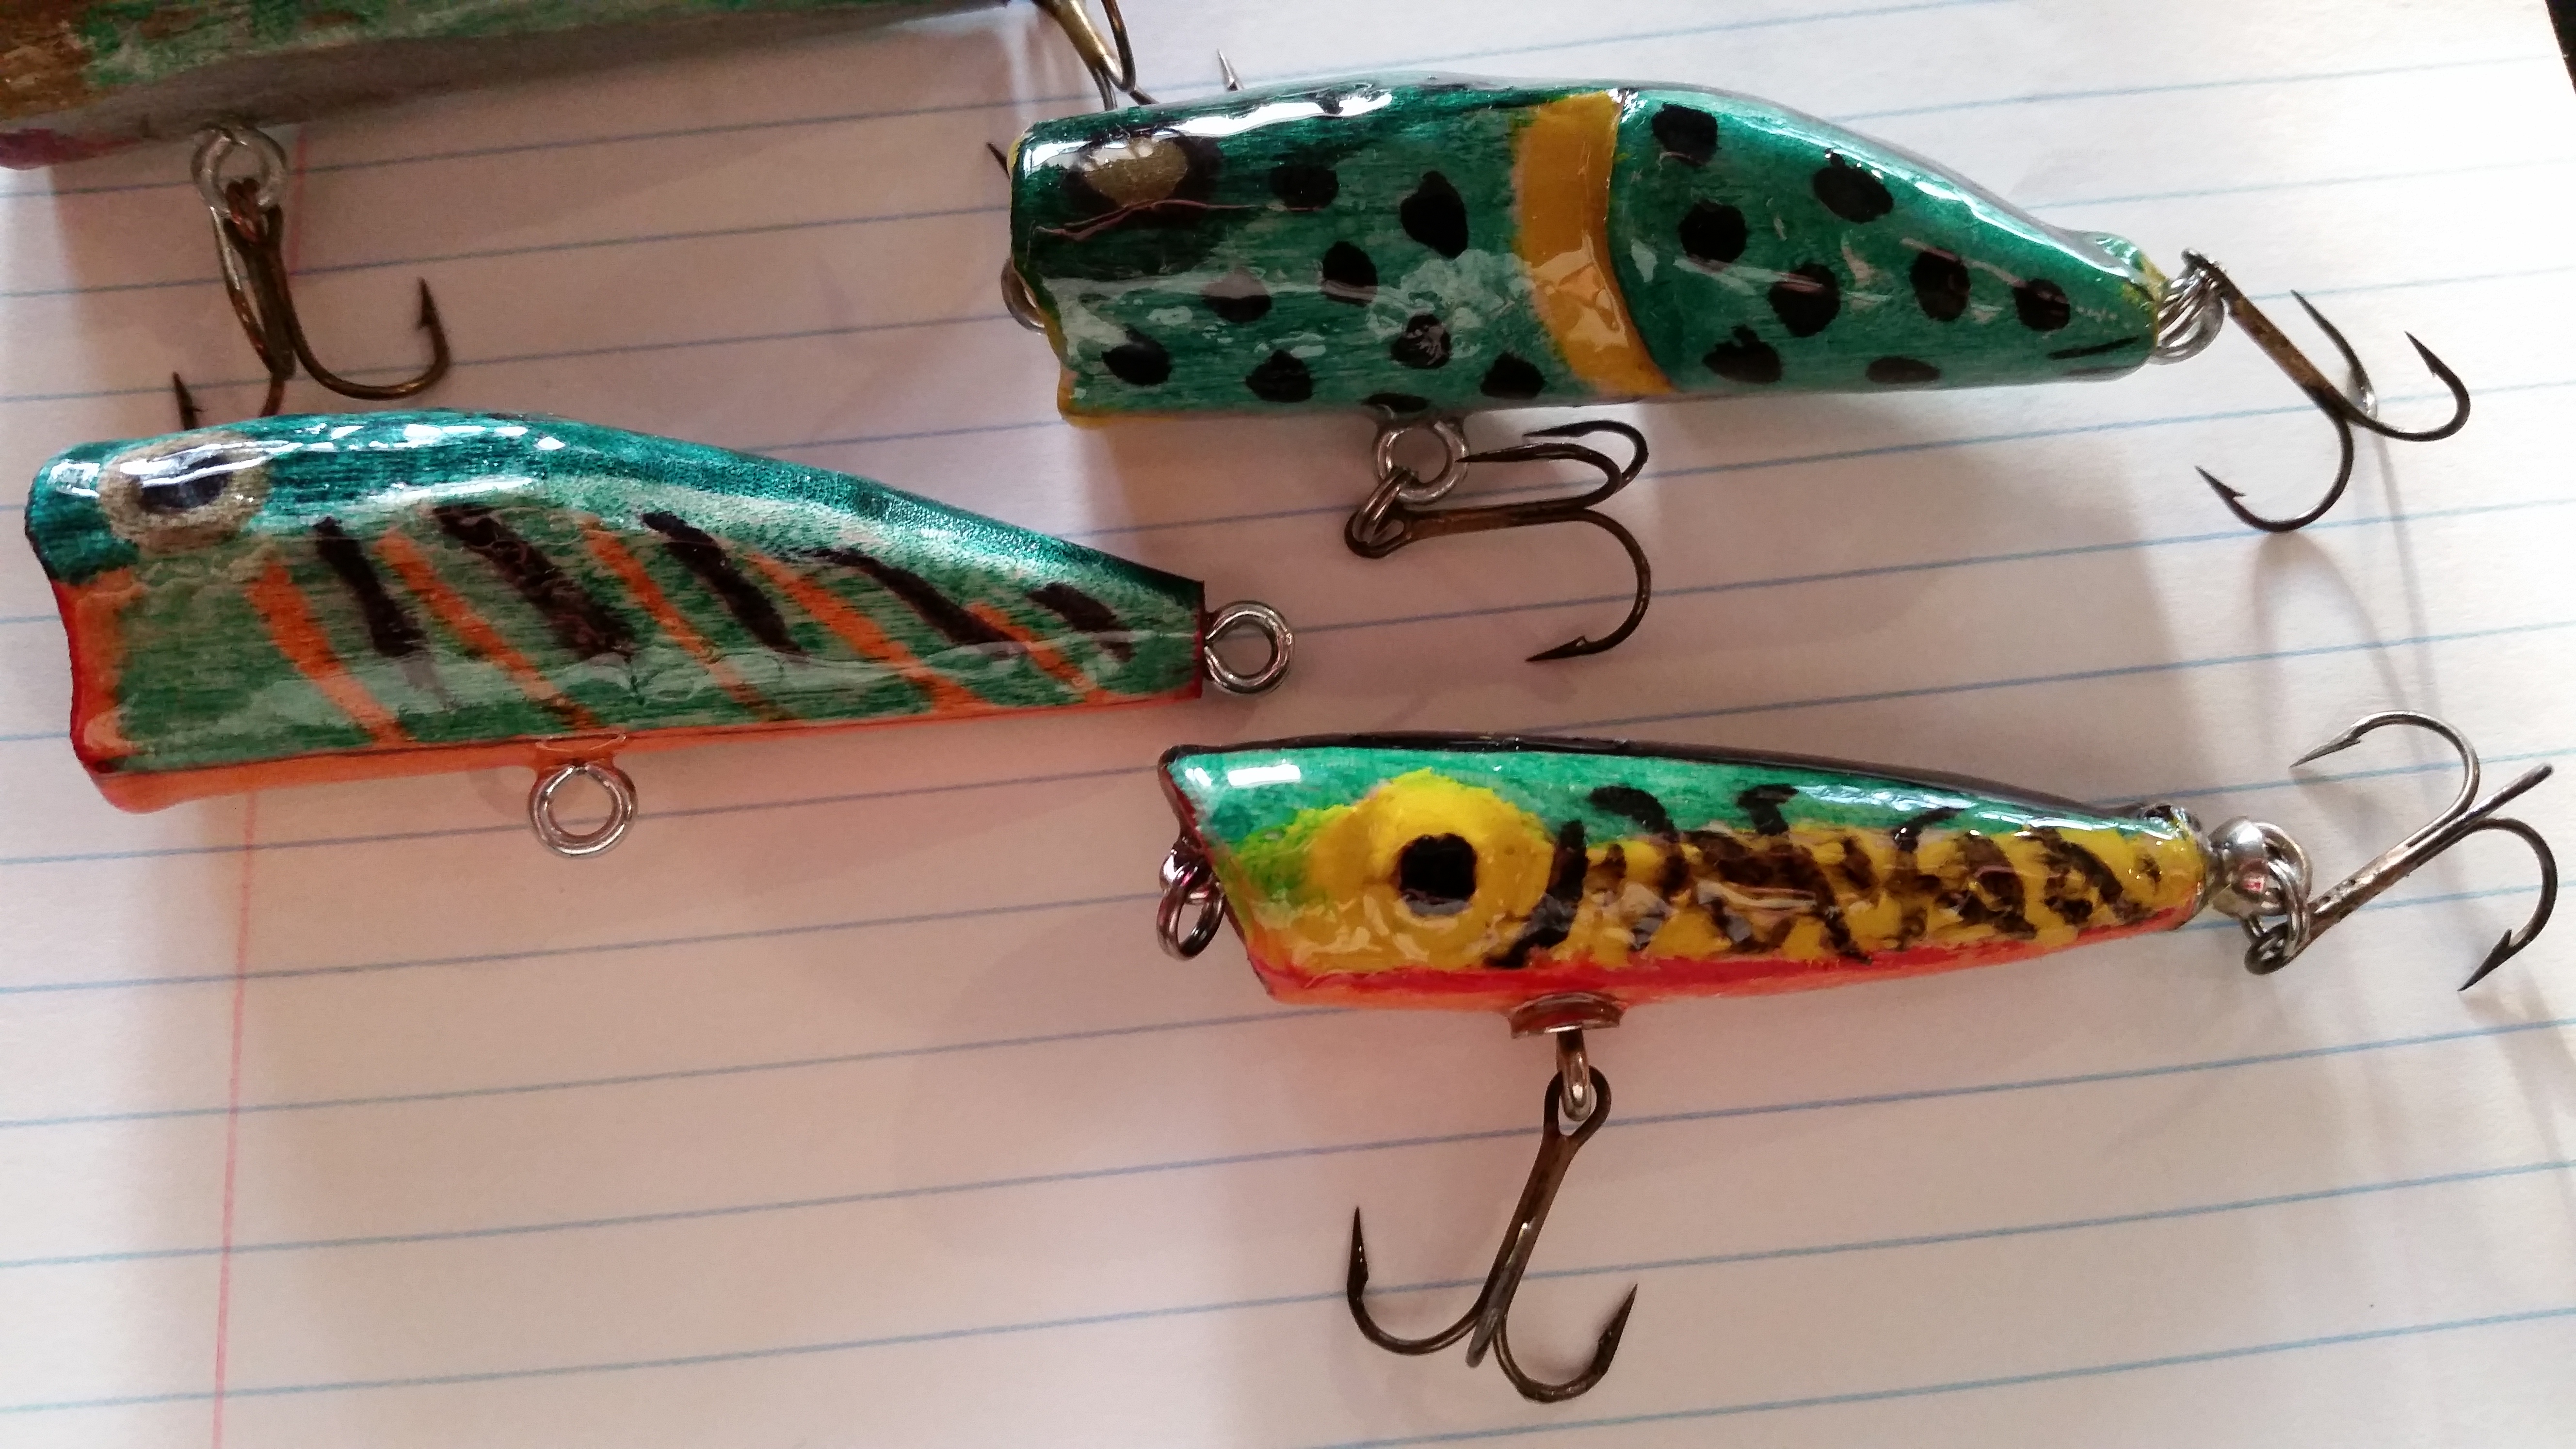 How To Make a Bass Popper - Top Water Fishing Poppers